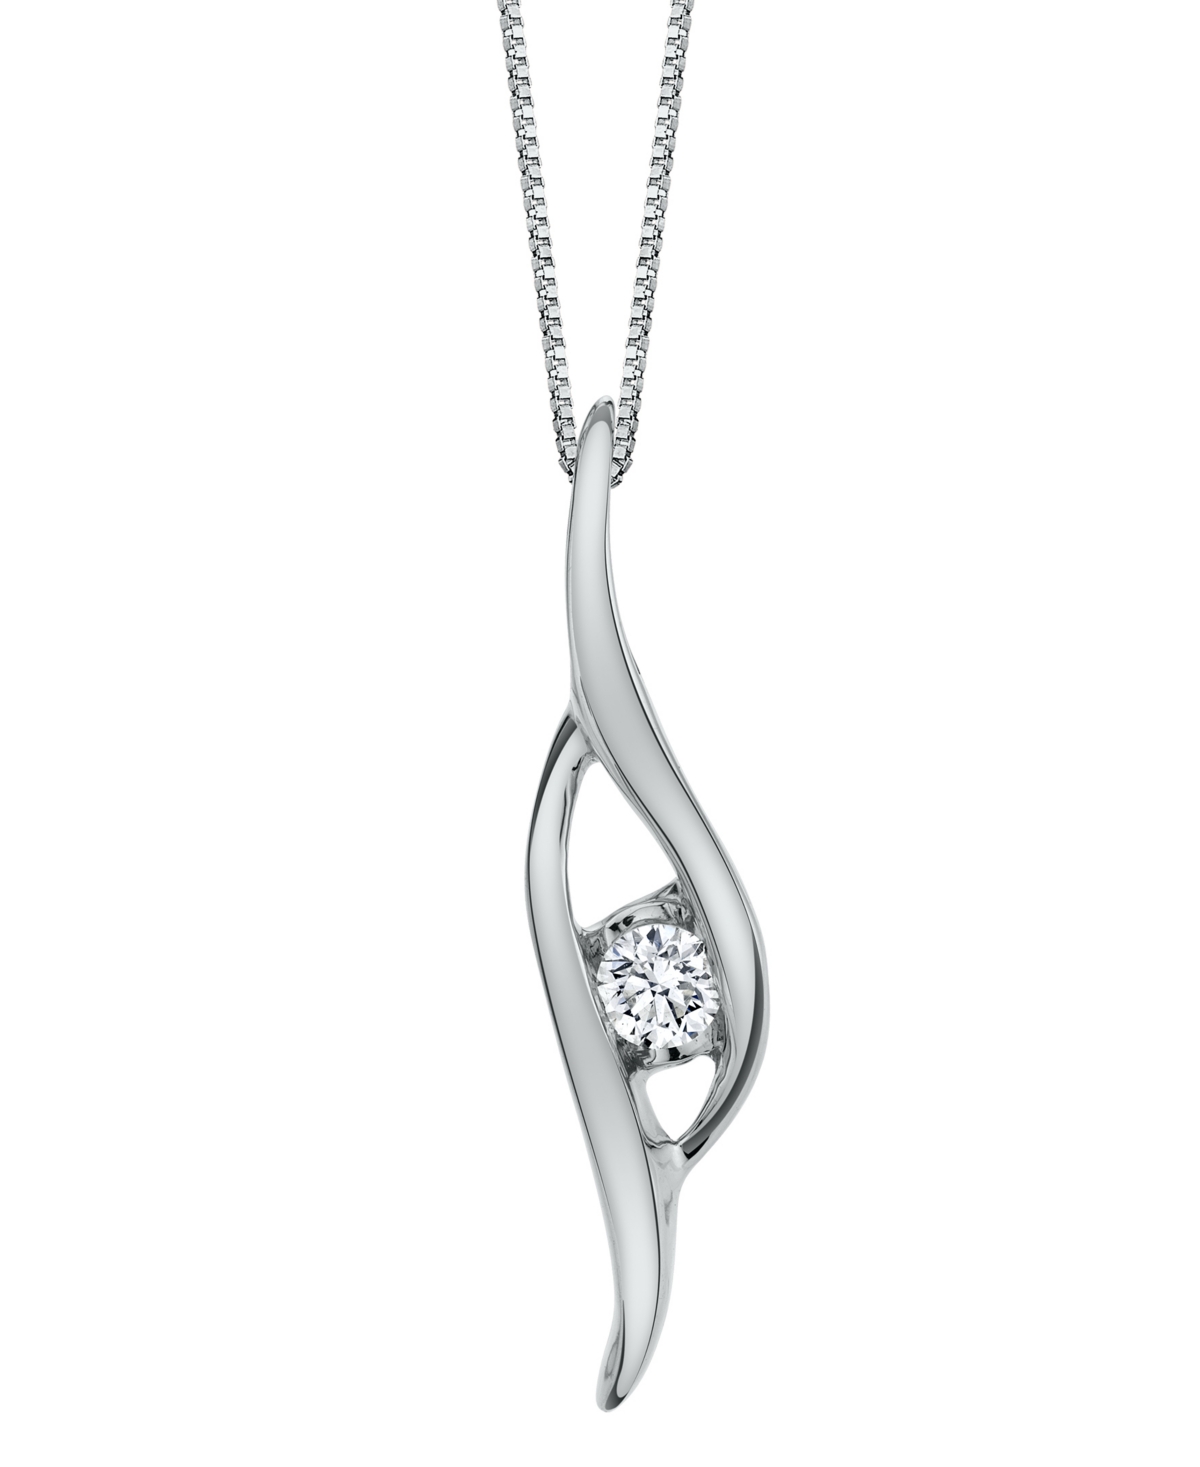 Diamond (1/8 ct. t.w.) Pendant in 14k White, Yellow or Rose Gold - ROSE GOLD